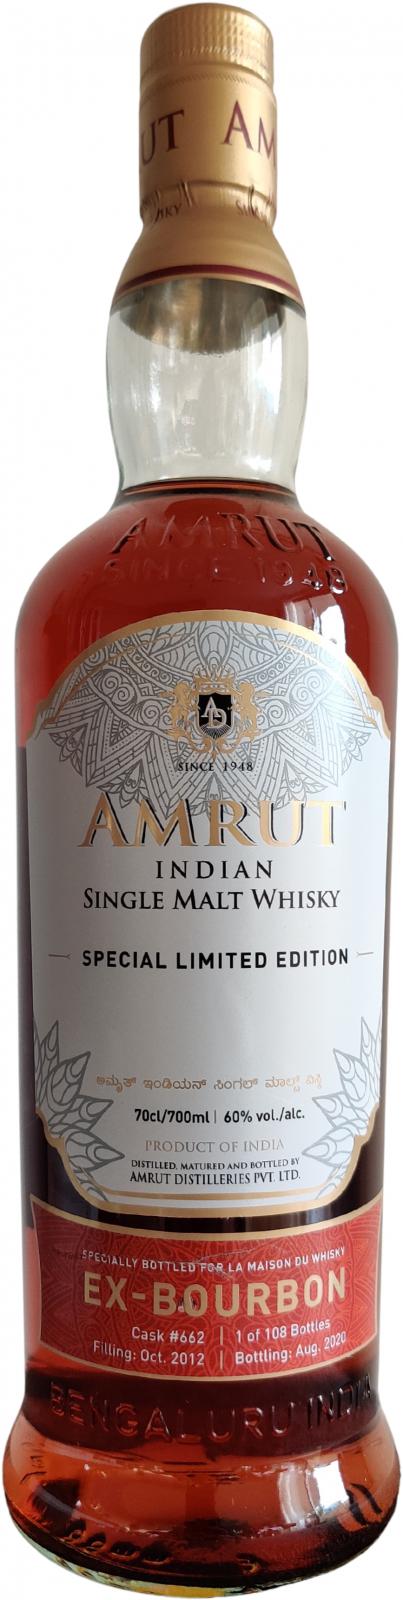 Amrut 2012 Special Limited Edition Ex-Bourbon Cask #662 LMDW 60% 700ml